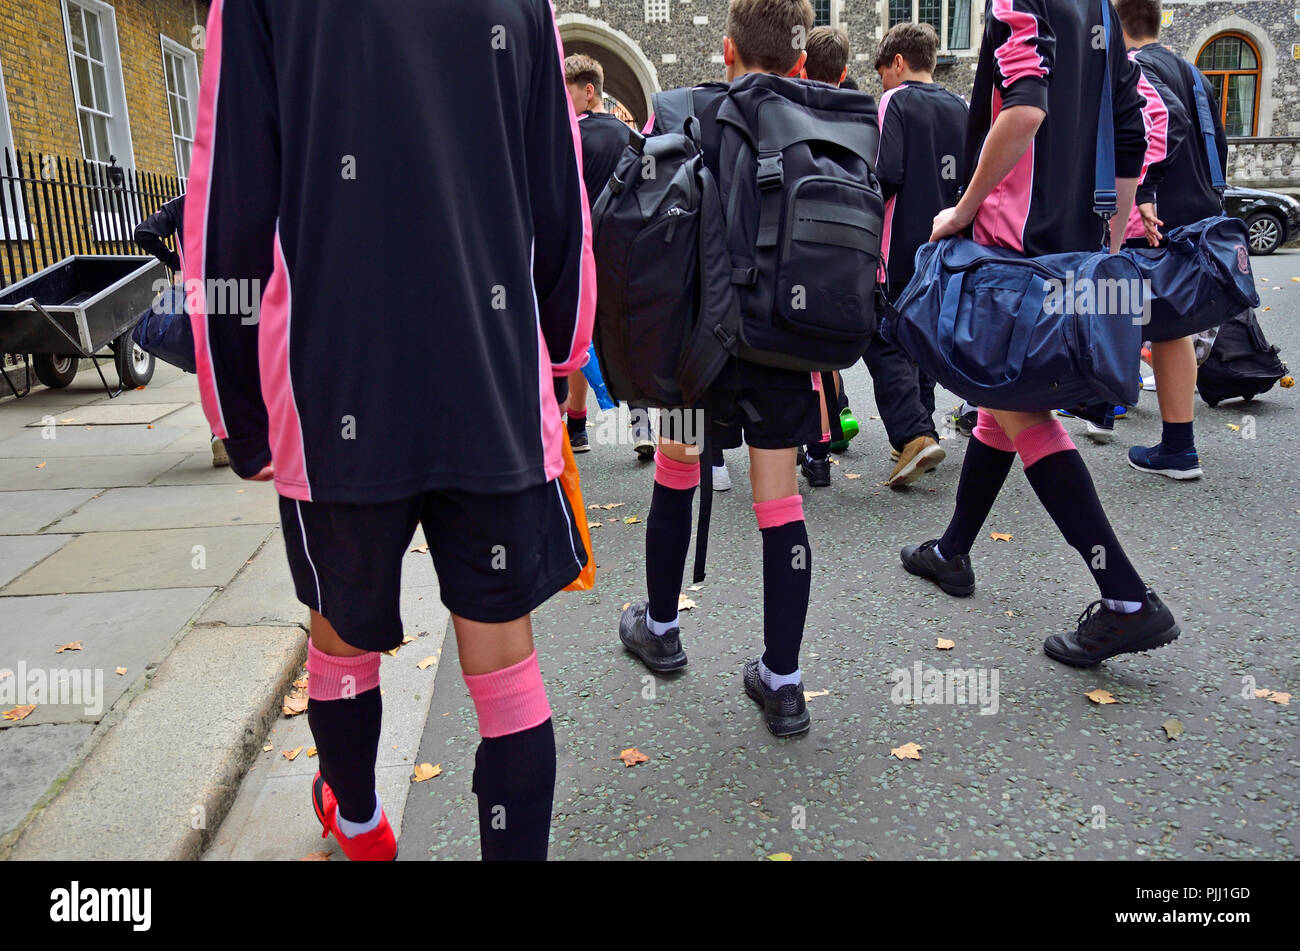 Schoolboys going to a sports lesson in uniform sports kit - London, England, UK. Stock Photo